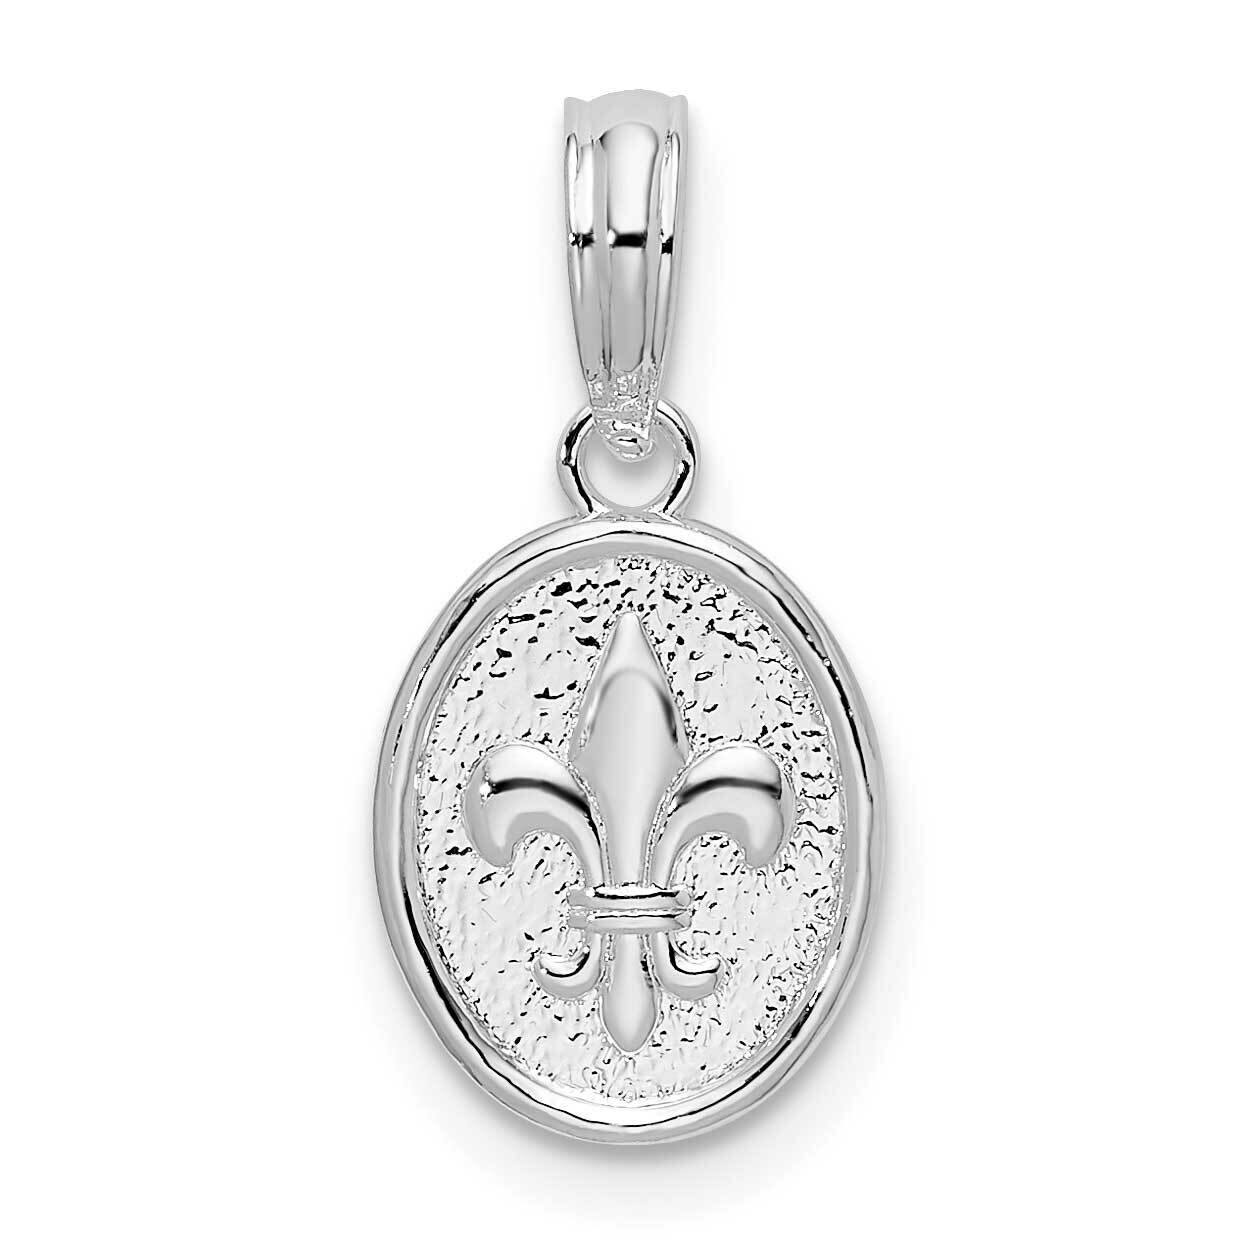 Textured Fleur De Lis Small Oval Pendant Sterling Silver Polished QC10131